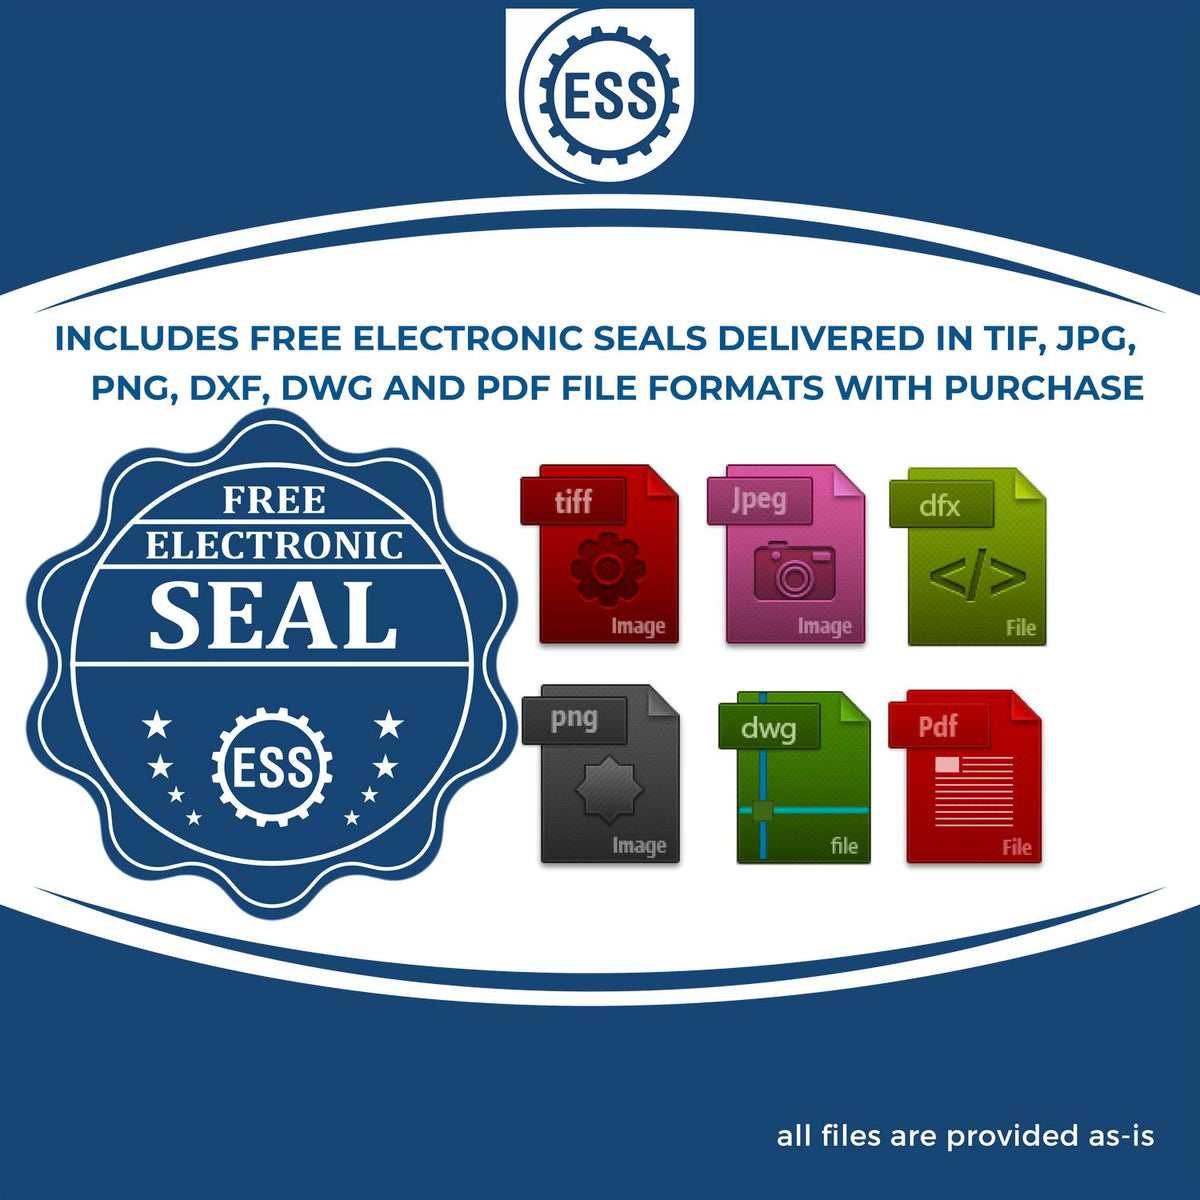 An infographic for the free electronic seal for the Heavy Duty Cast Iron Ohio Geologist Seal Embosser illustrating the different file type icons such as DXF, DWG, TIF, JPG and PNG.